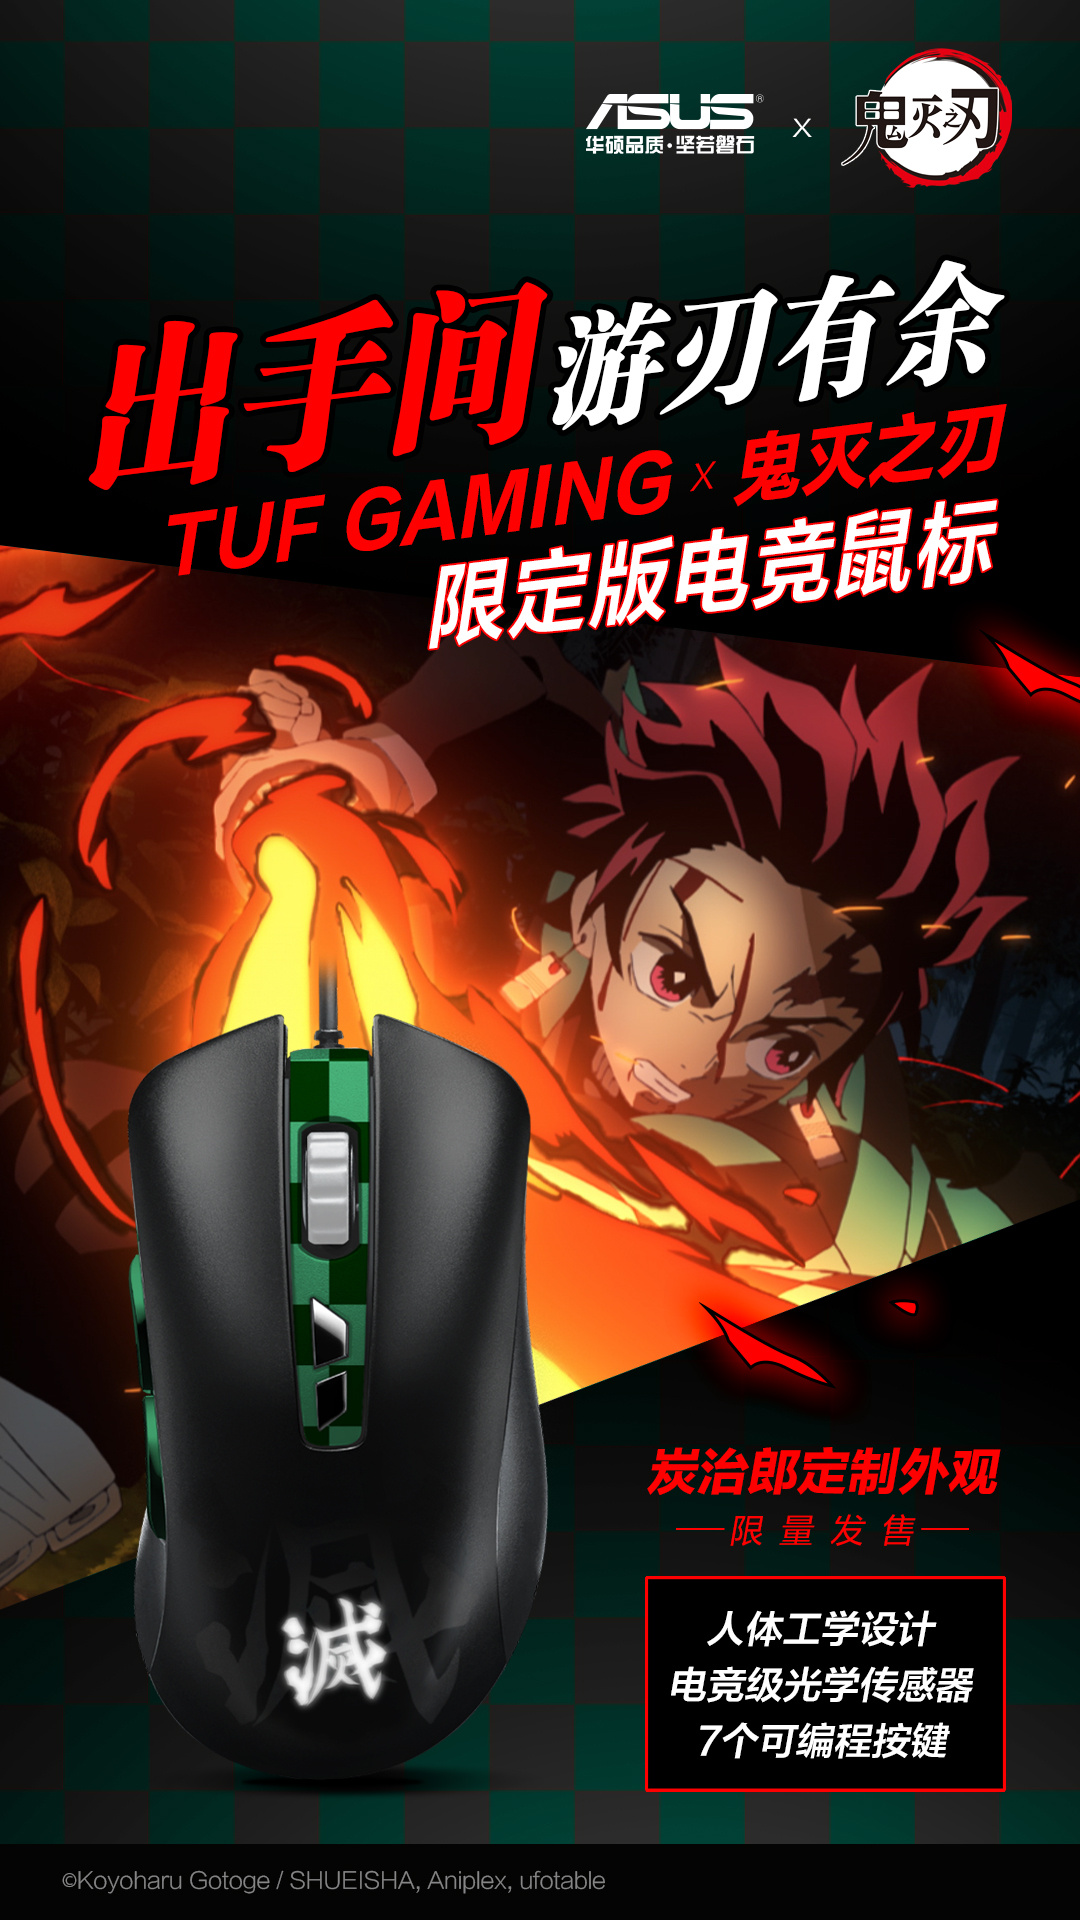 ASUS-Demon-Slayer-Products-4.jpg